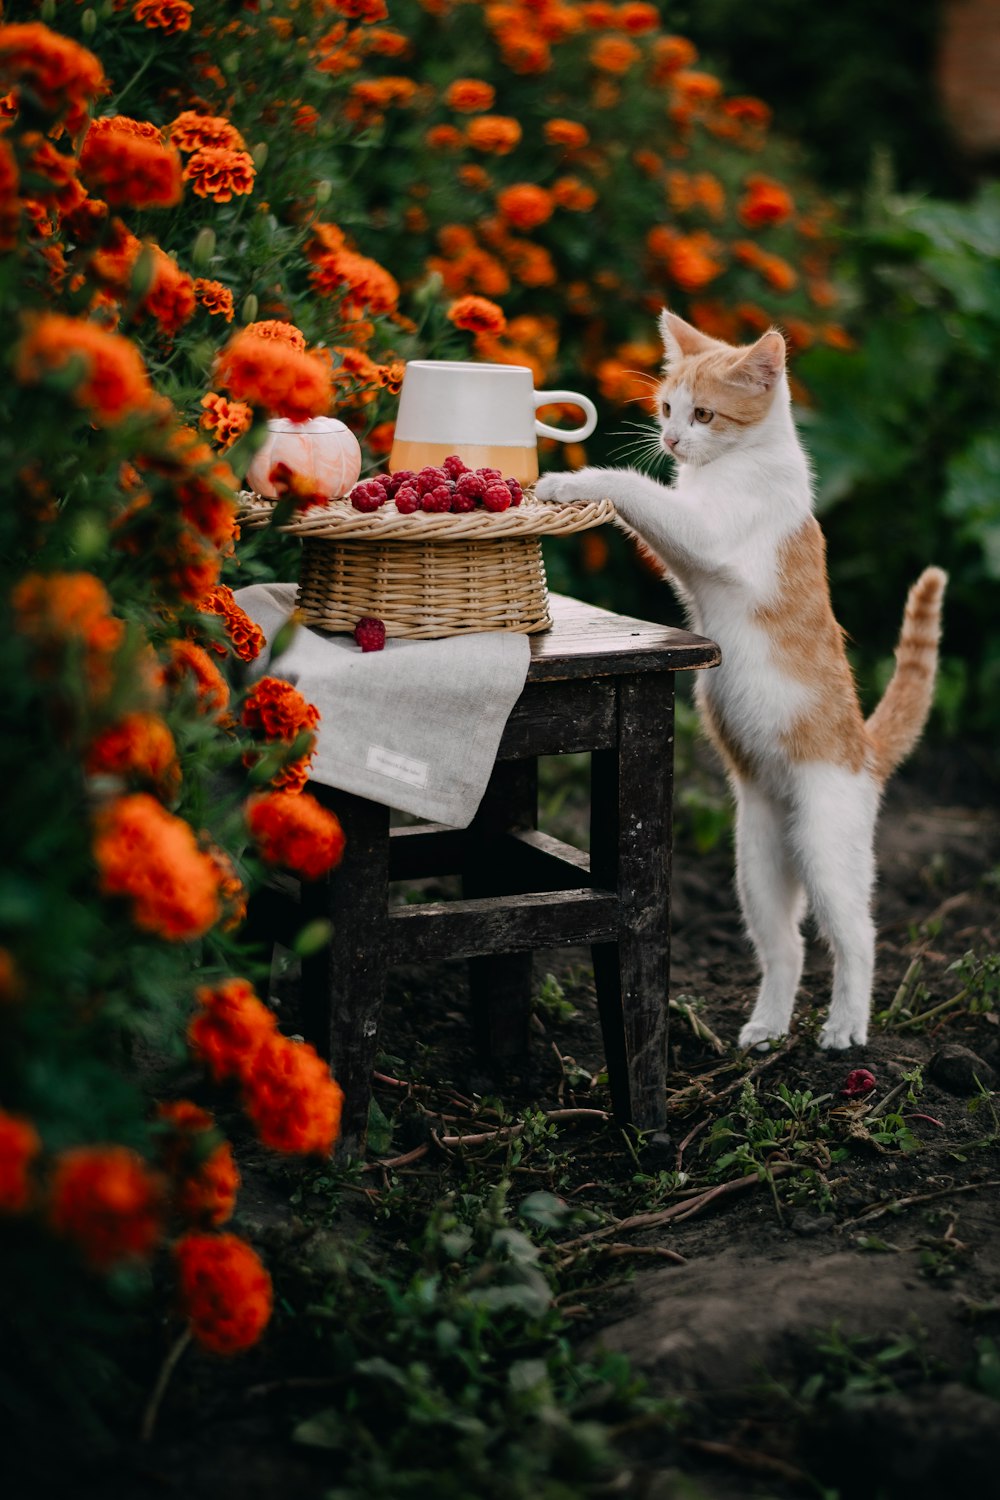 a cat standing next to a table with a basket of fruit on it